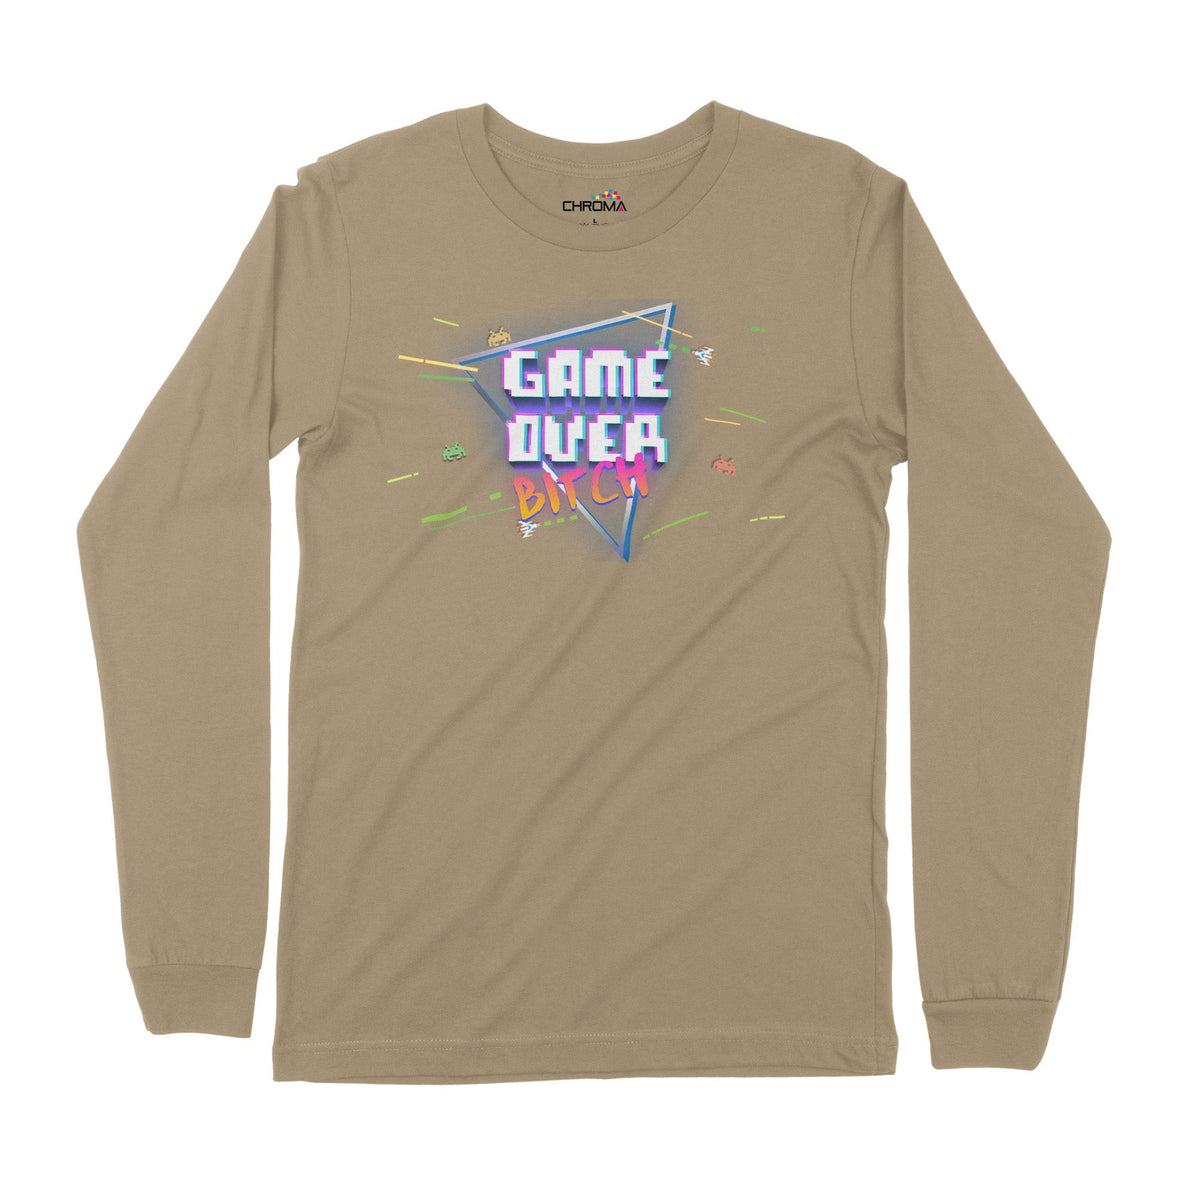 Game Over Bitch | Long-Sleeve T-Shirt | Premium Quality Streetwear Chroma Clothing